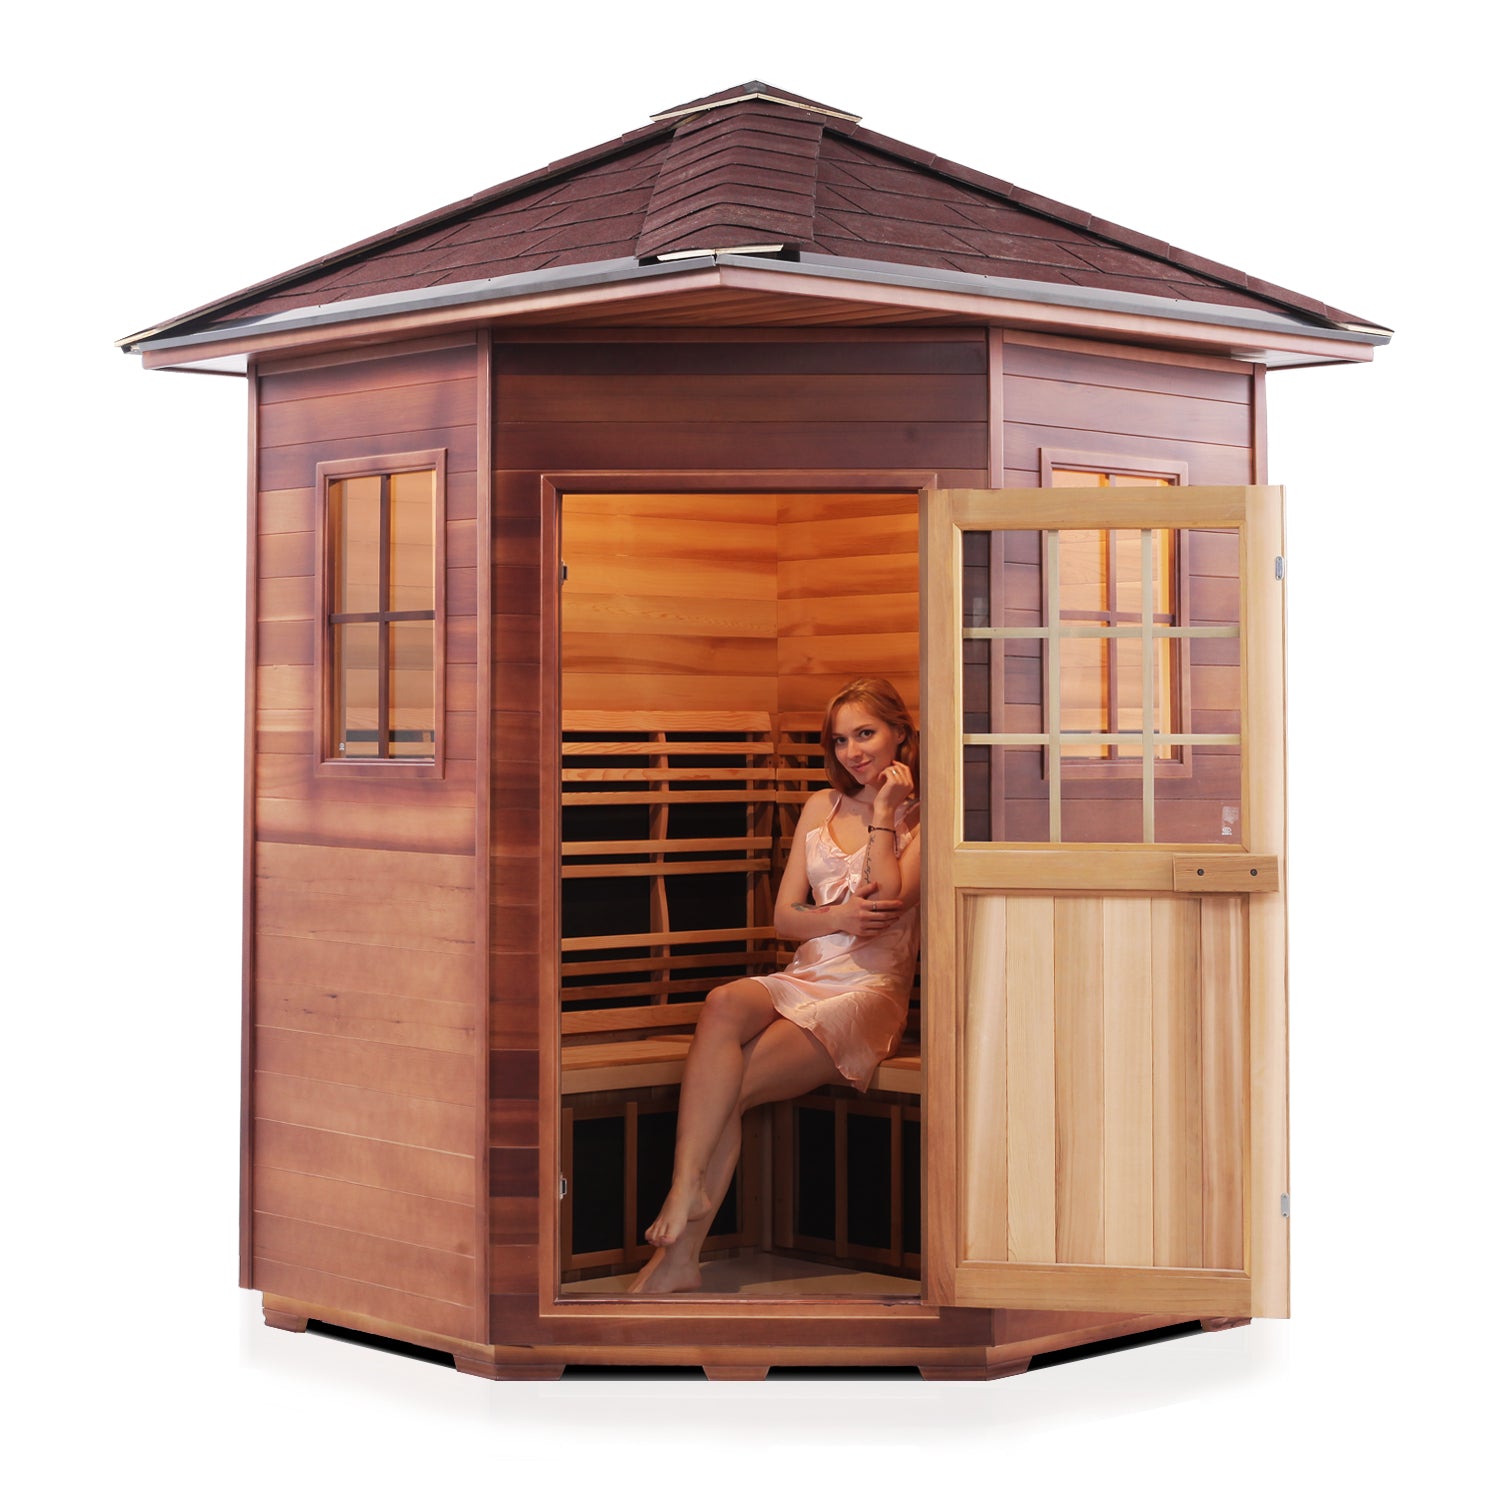 Enlighten Sauna InfraNature Original Infrared Outdoor Canadian red cedar inside and out with peak roof front view